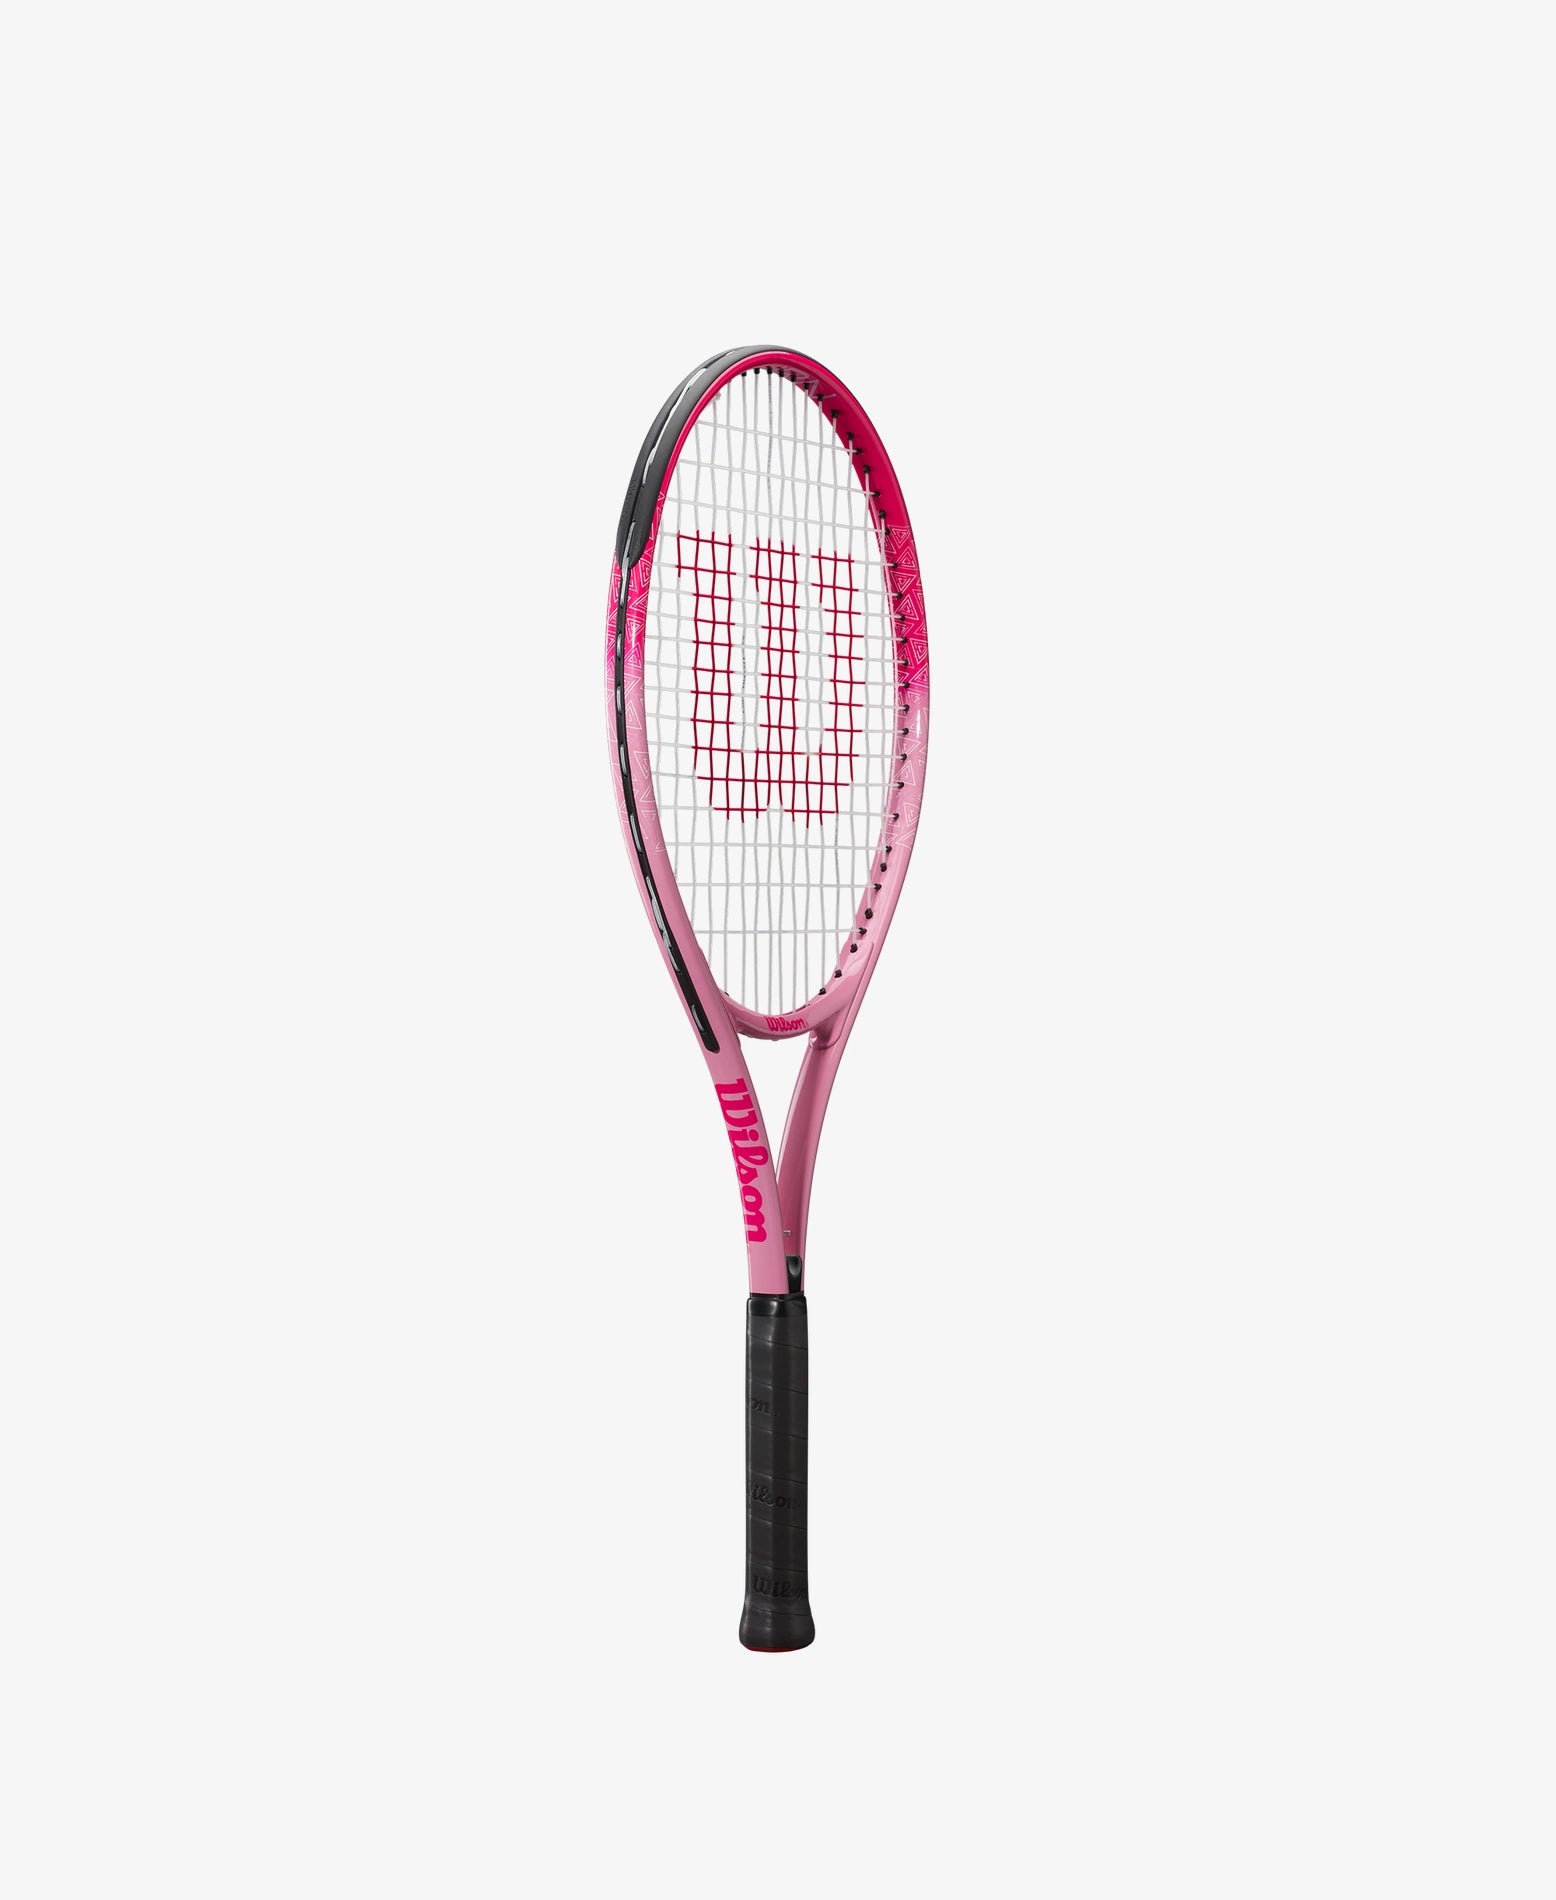 The Wilson Burn Pink 25 Tennis Racket available for sale at GSM Sports. 